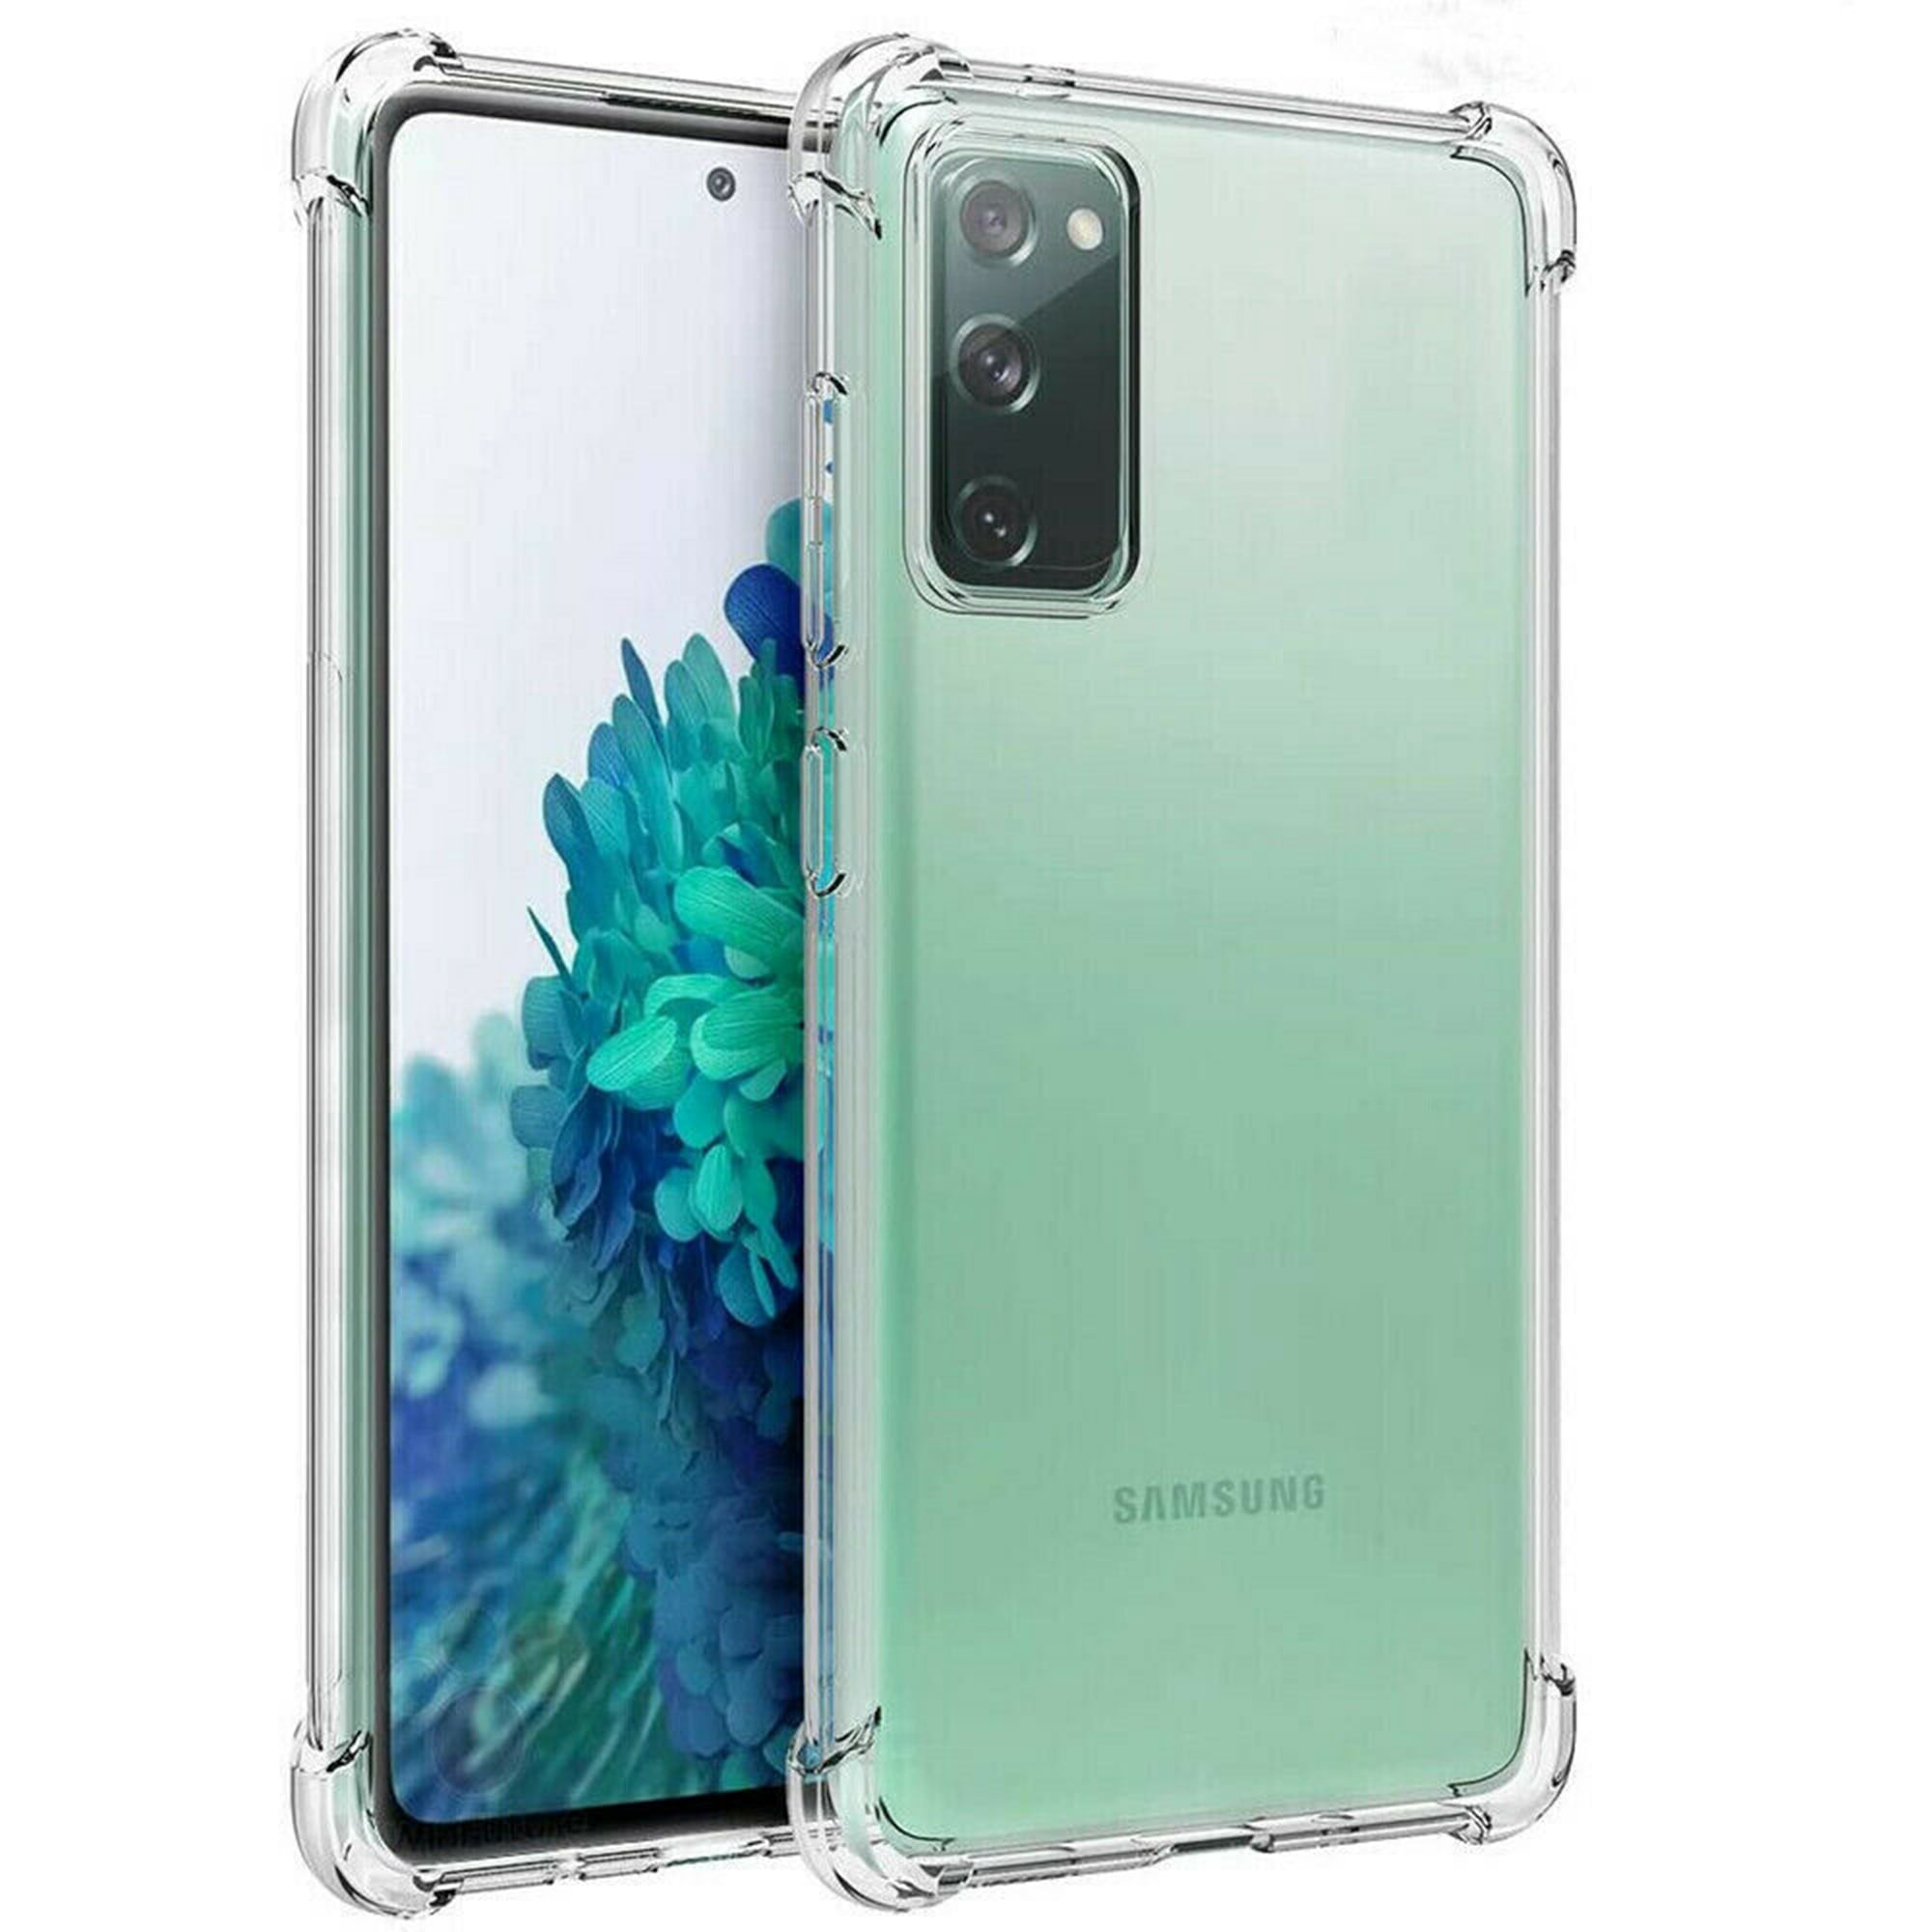 Coque protection Crystal Clear pr Samsung Galaxy S20 FE (5G), trans.